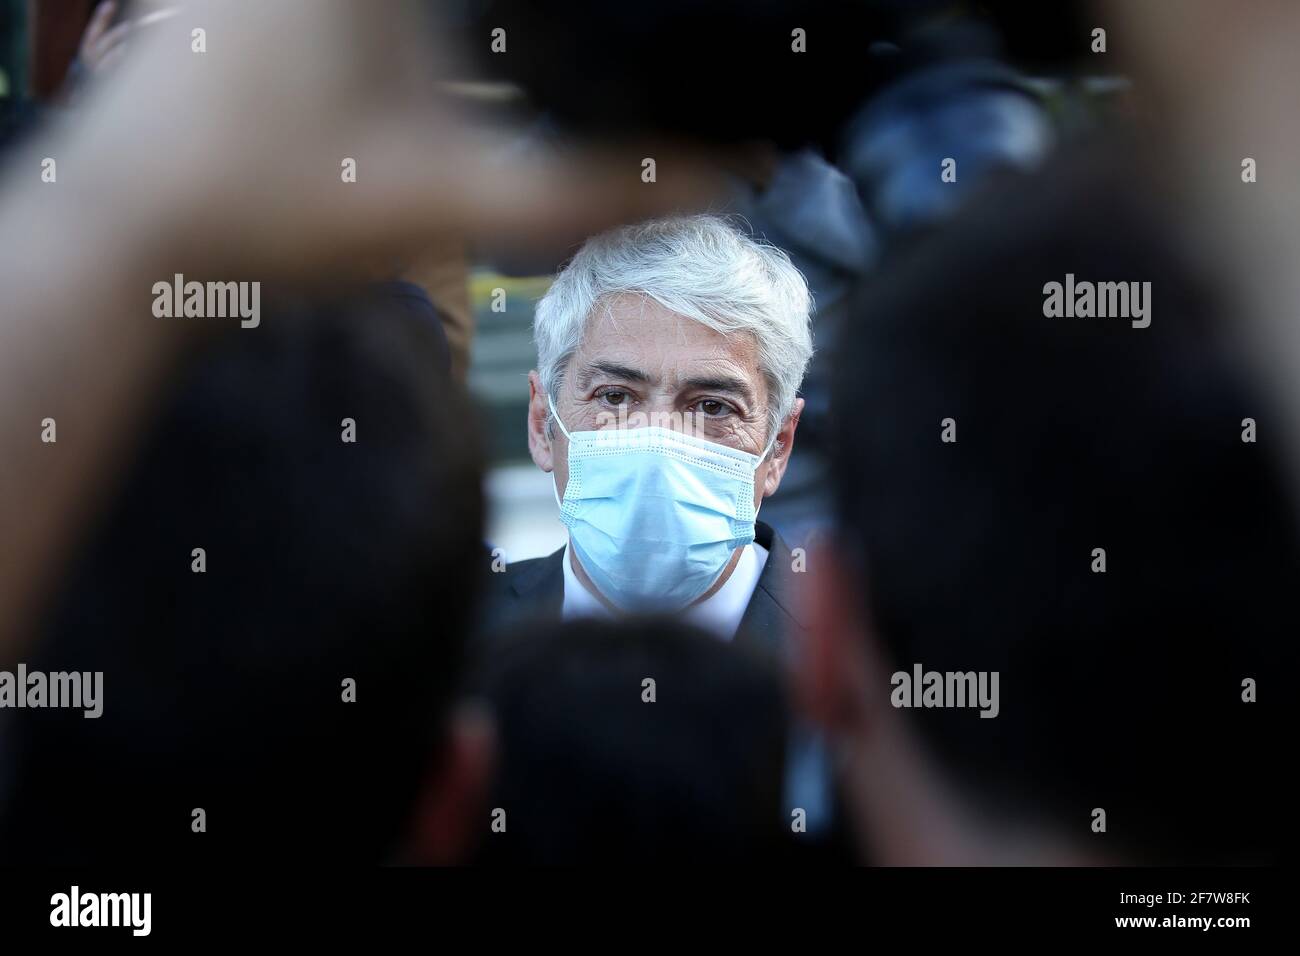 Lisbon, Portugal. 9th Apr, 2021. Portugal's former Prime Minister Jose Socrates wearing a face mask speaks to journalists as he leaves the court in Lisbon, Portugal, April 9, 2021. Portugal's former prime minister Jose Socrates will be the country's first head of government to stand trial, having been indicted for money laundering and forgery of documents, according to a decision by Judge Ivo Rosa on Friday. Credit: Petro Fiuza/Xinhua/Alamy Live News Stock Photo